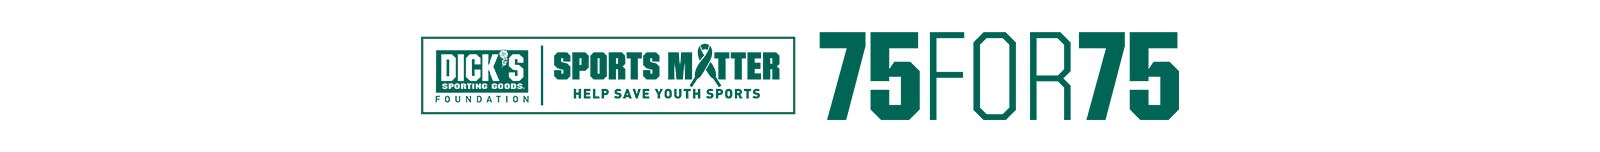 Sports Matter 75 For 75